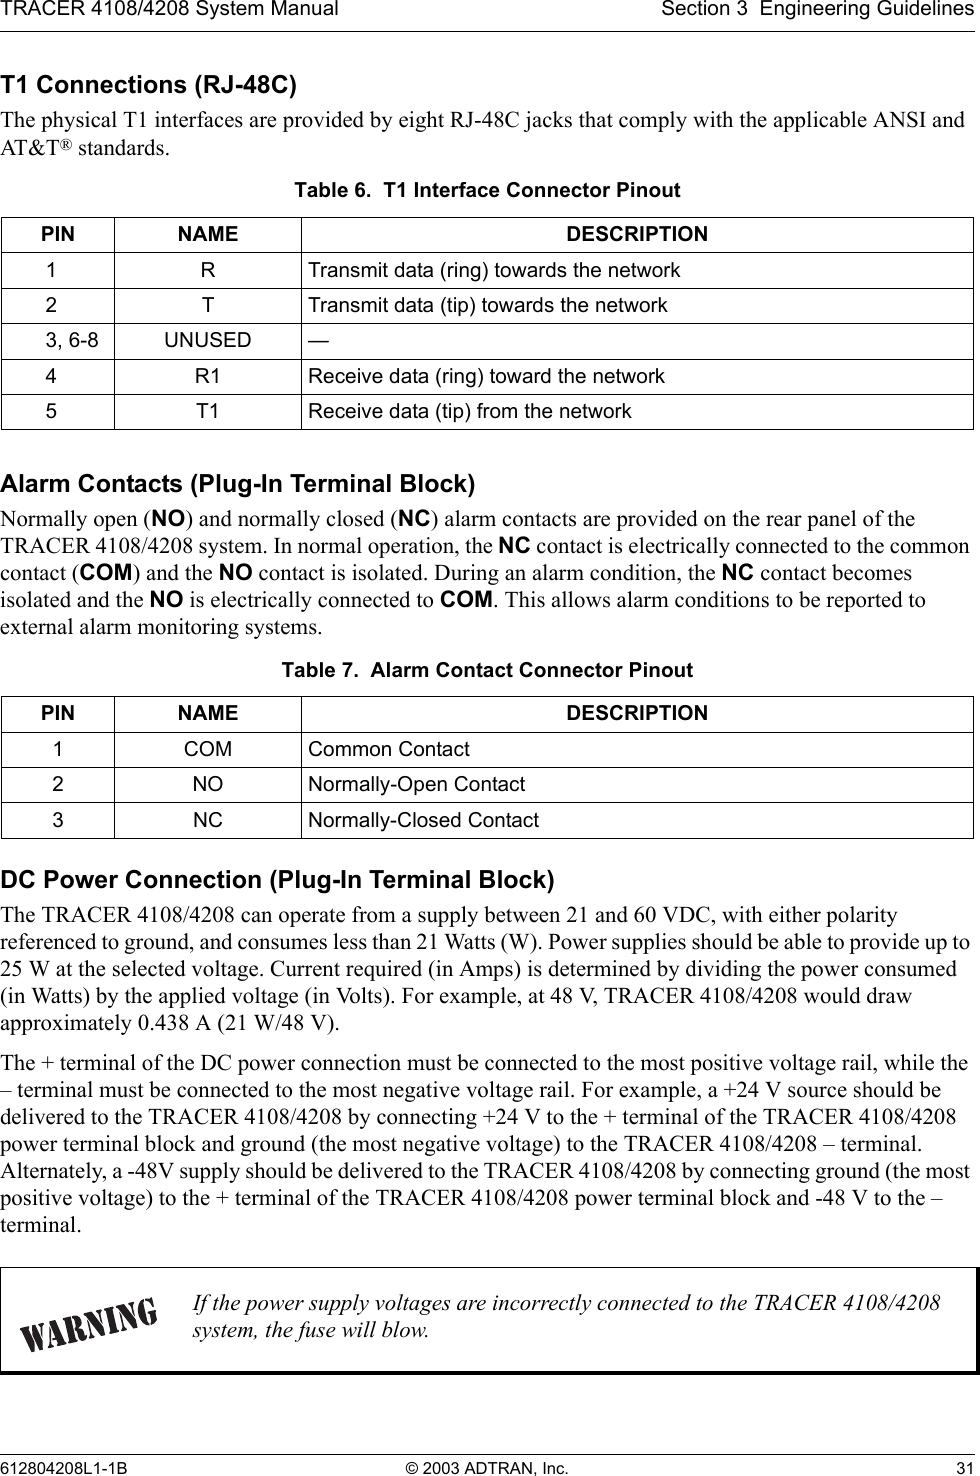 TRACER 4108/4208 System Manual Section 3  Engineering Guidelines612804208L1-1B © 2003 ADTRAN, Inc. 31T1 Connections (RJ-48C)The physical T1 interfaces are provided by eight RJ-48C jacks that comply with the applicable ANSI and AT&amp; T® standards.Alarm Contacts (Plug-In Terminal Block)Normally open (NO) and normally closed (NC) alarm contacts are provided on the rear panel of the TRACER 4108/4208 system. In normal operation, the NC contact is electrically connected to the common contact (COM) and the NO contact is isolated. During an alarm condition, the NC contact becomes isolated and the NO is electrically connected to COM. This allows alarm conditions to be reported to external alarm monitoring systems.DC Power Connection (Plug-In Terminal Block)The TRACER 4108/4208 can operate from a supply between 21 and 60 VDC, with either polarity referenced to ground, and consumes less than 21 Watts (W). Power supplies should be able to provide up to 25 W at the selected voltage. Current required (in Amps) is determined by dividing the power consumed (in Watts) by the applied voltage (in Volts). For example, at 48 V, TRACER 4108/4208 would draw approximately 0.438 A (21 W/48 V). The + terminal of the DC power connection must be connected to the most positive voltage rail, while the – terminal must be connected to the most negative voltage rail. For example, a +24 V source should be delivered to the TRACER 4108/4208 by connecting +24 V to the + terminal of the TRACER 4108/4208 power terminal block and ground (the most negative voltage) to the TRACER 4108/4208 – terminal. Alternately, a -48V supply should be delivered to the TRACER 4108/4208 by connecting ground (the most positive voltage) to the + terminal of the TRACER 4108/4208 power terminal block and -48 V to the – terminal.Table 6.  T1 Interface Connector PinoutPIN NAME DESCRIPTION1RTransmit data (ring) towards the network2 T Transmit data (tip) towards the network3, 6-8 UNUSED —4R1 Receive data (ring) toward the network5T1 Receive data (tip) from the networkTable 7.  Alarm Contact Connector PinoutPIN NAME DESCRIPTION1 COM Common Contact2NO Normally-Open Contact3NC Normally-Closed ContactIf the power supply voltages are incorrectly connected to the TRACER 4108/4208 system, the fuse will blow.